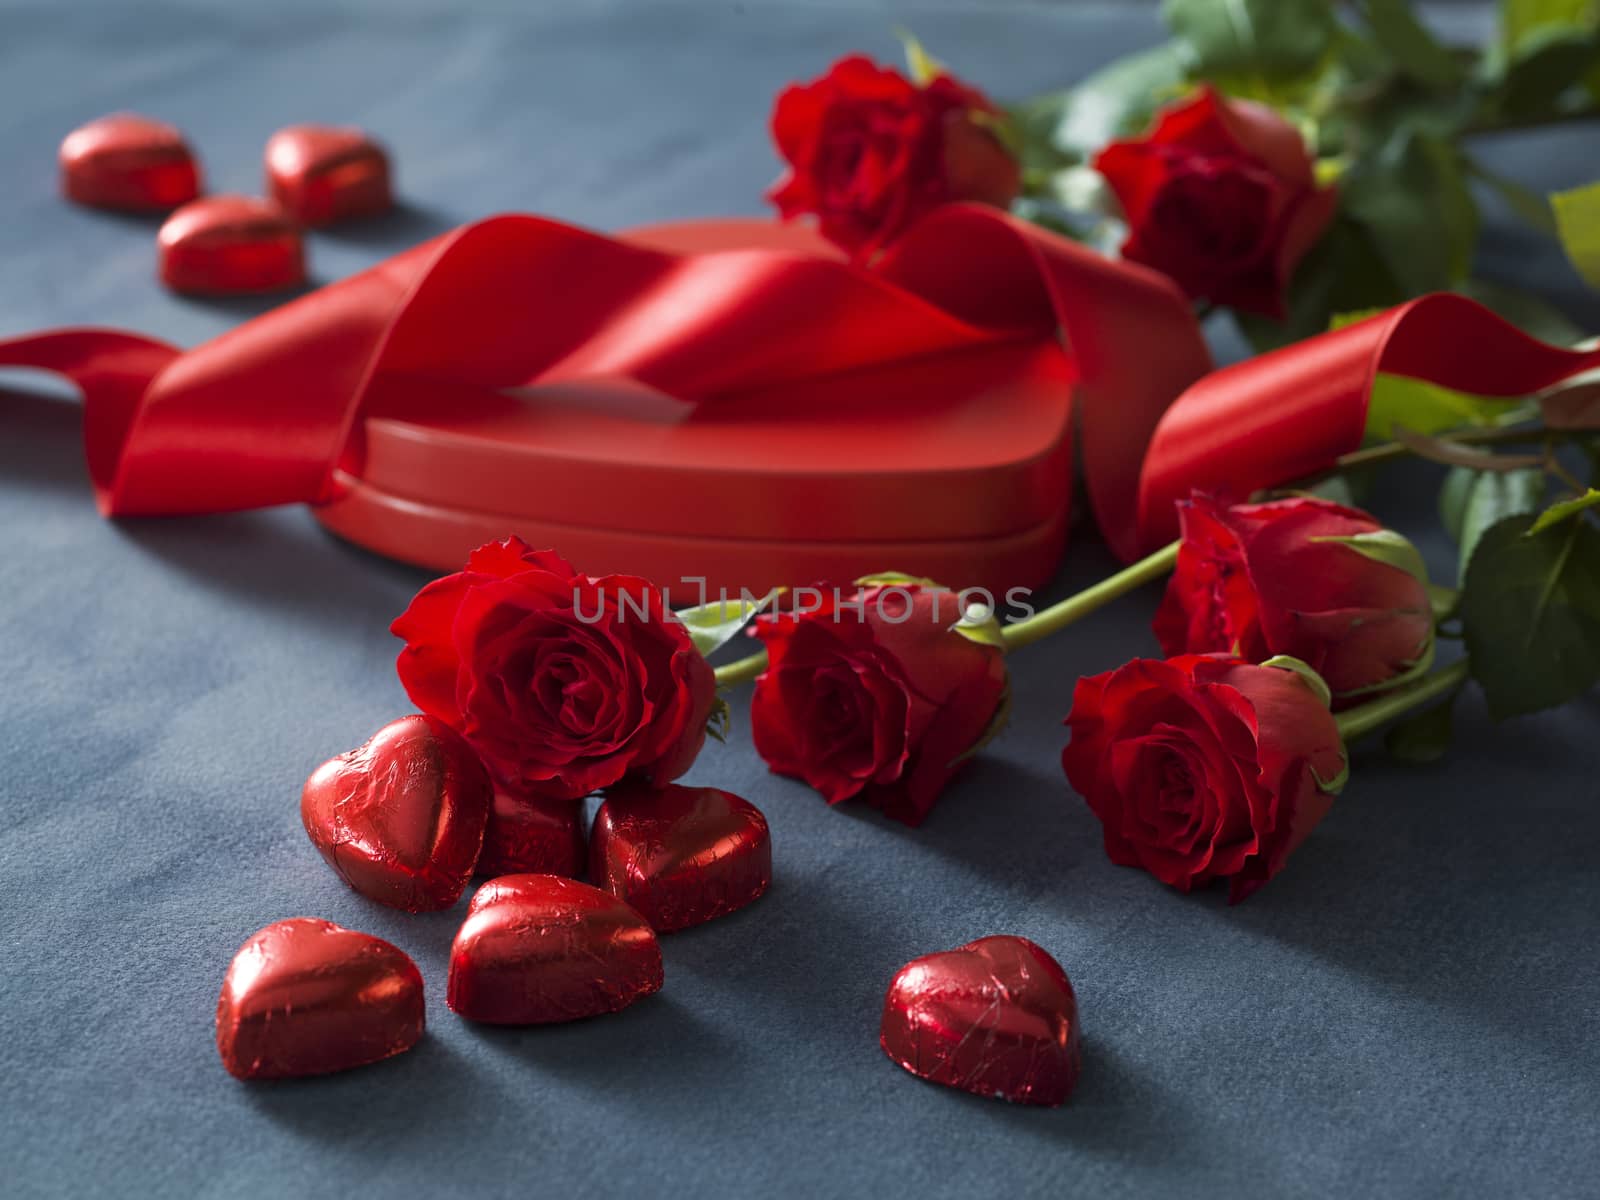 Bunch of Valentines Day red roses and box with red hearts by janssenkruseproductions